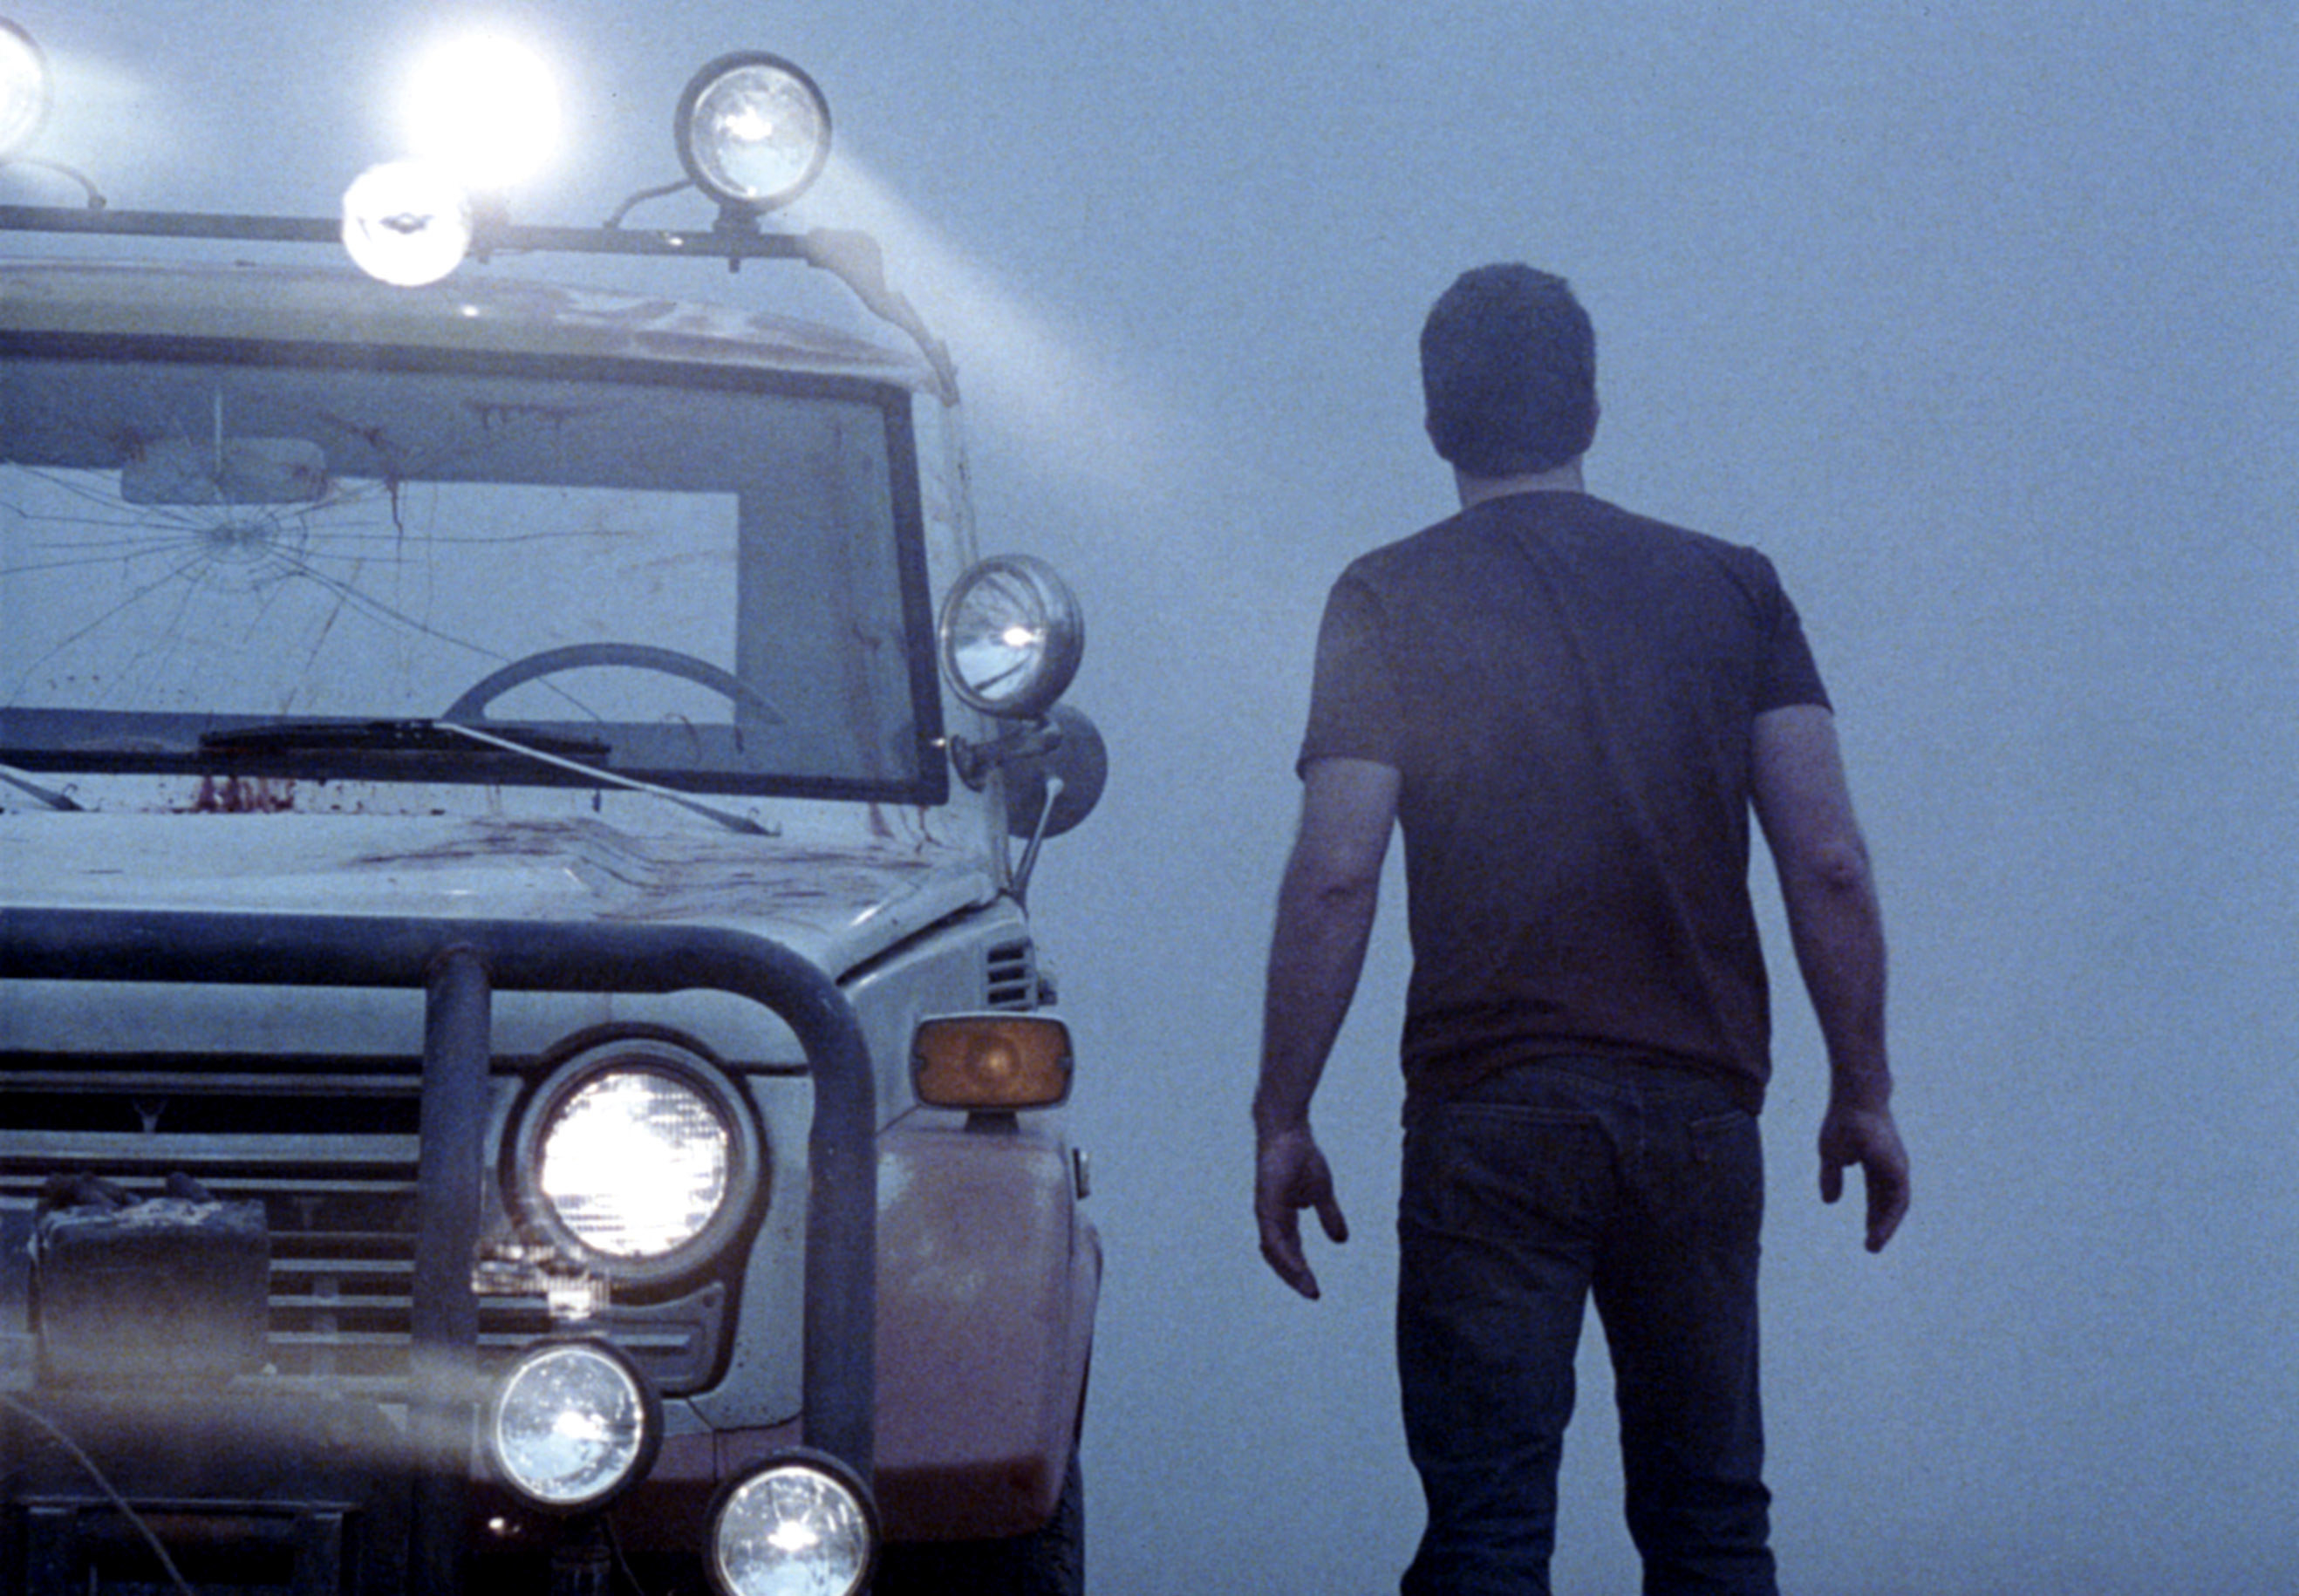 A man approaches a car in the mist